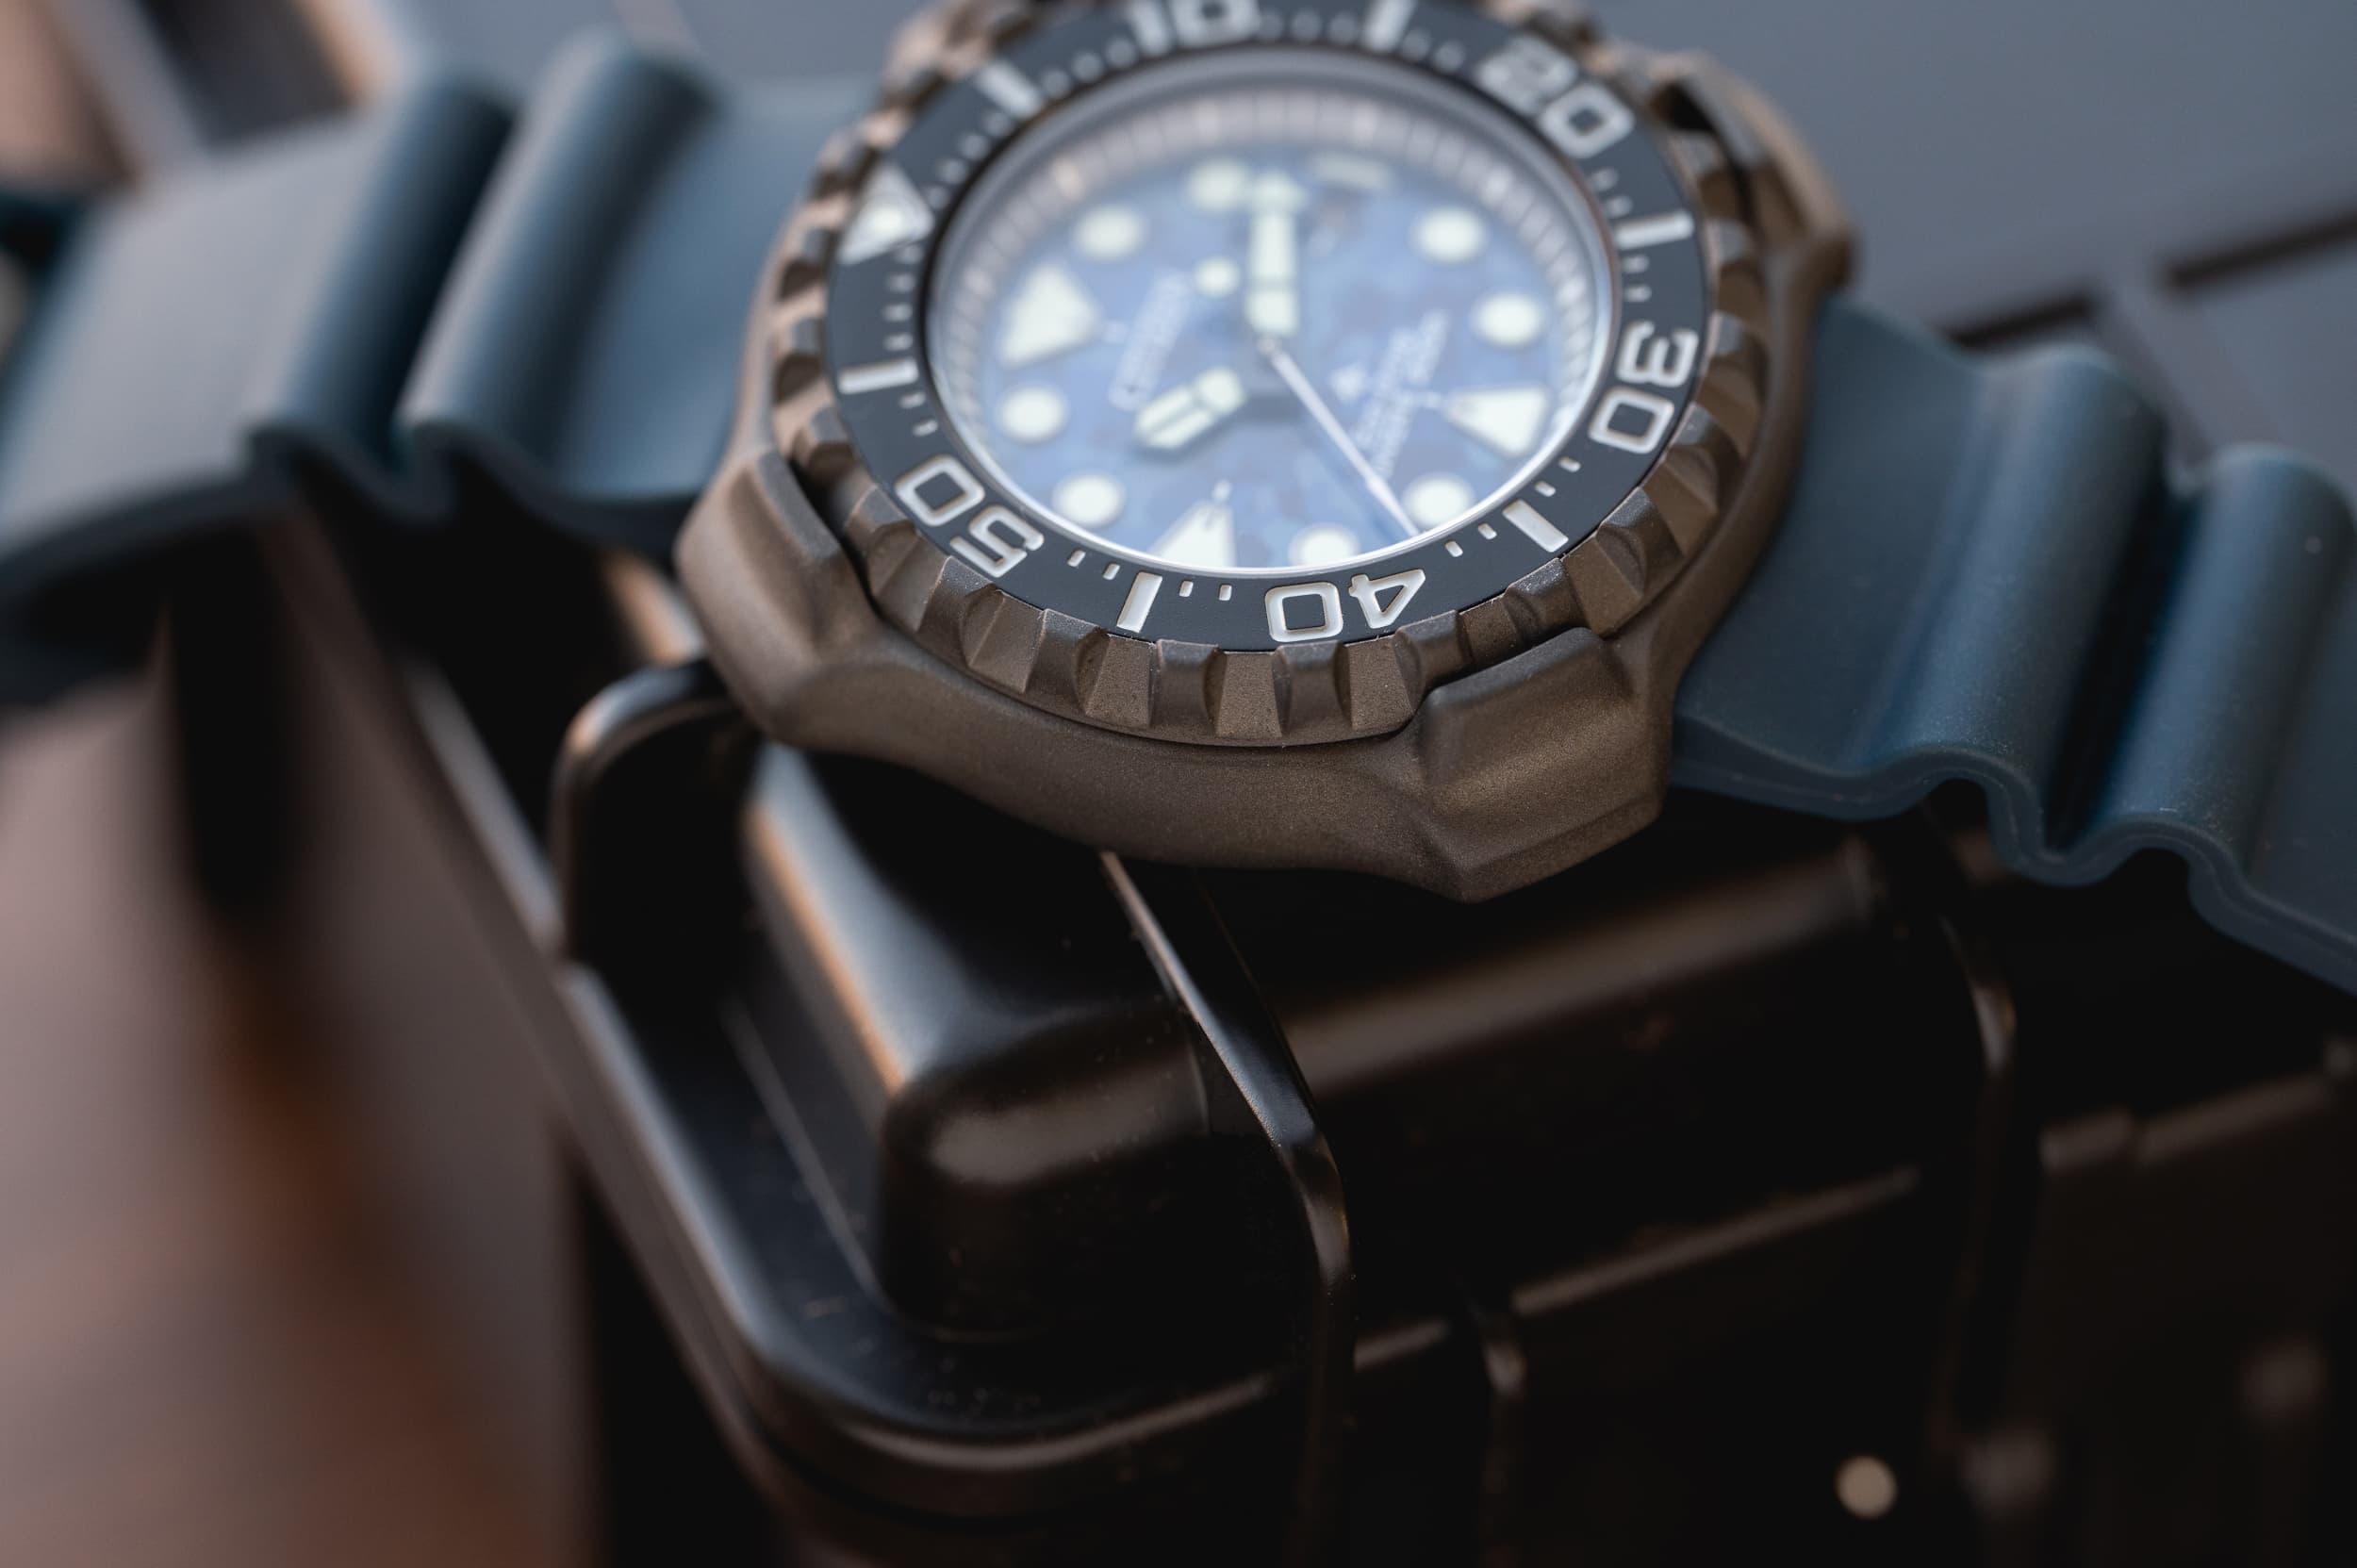 & Diver Yet Worn Review: Assertive Wound BN0227-09L Citizen - Promaster Approachable The